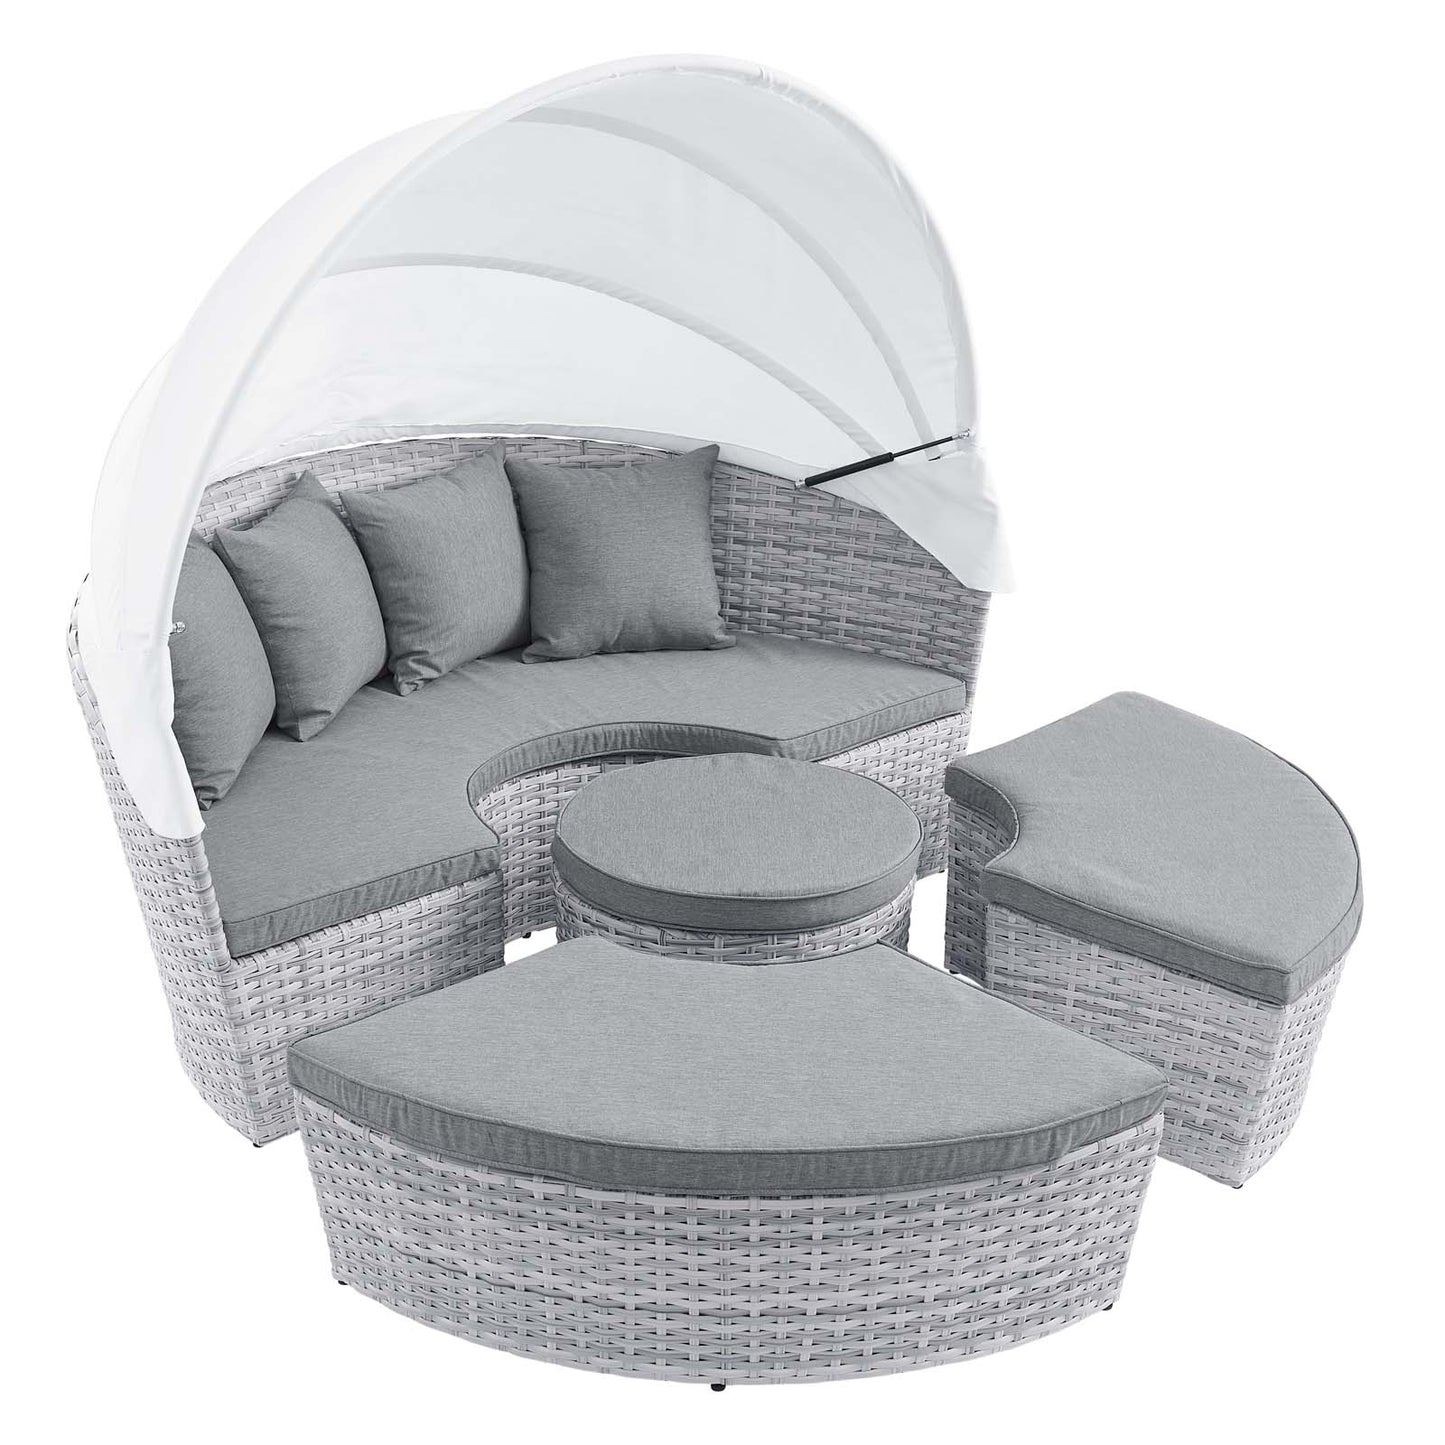 Scottsdale Canopy Outdoor Patio Daybed Light Gray Gray EEI-4442-LGR-GRY